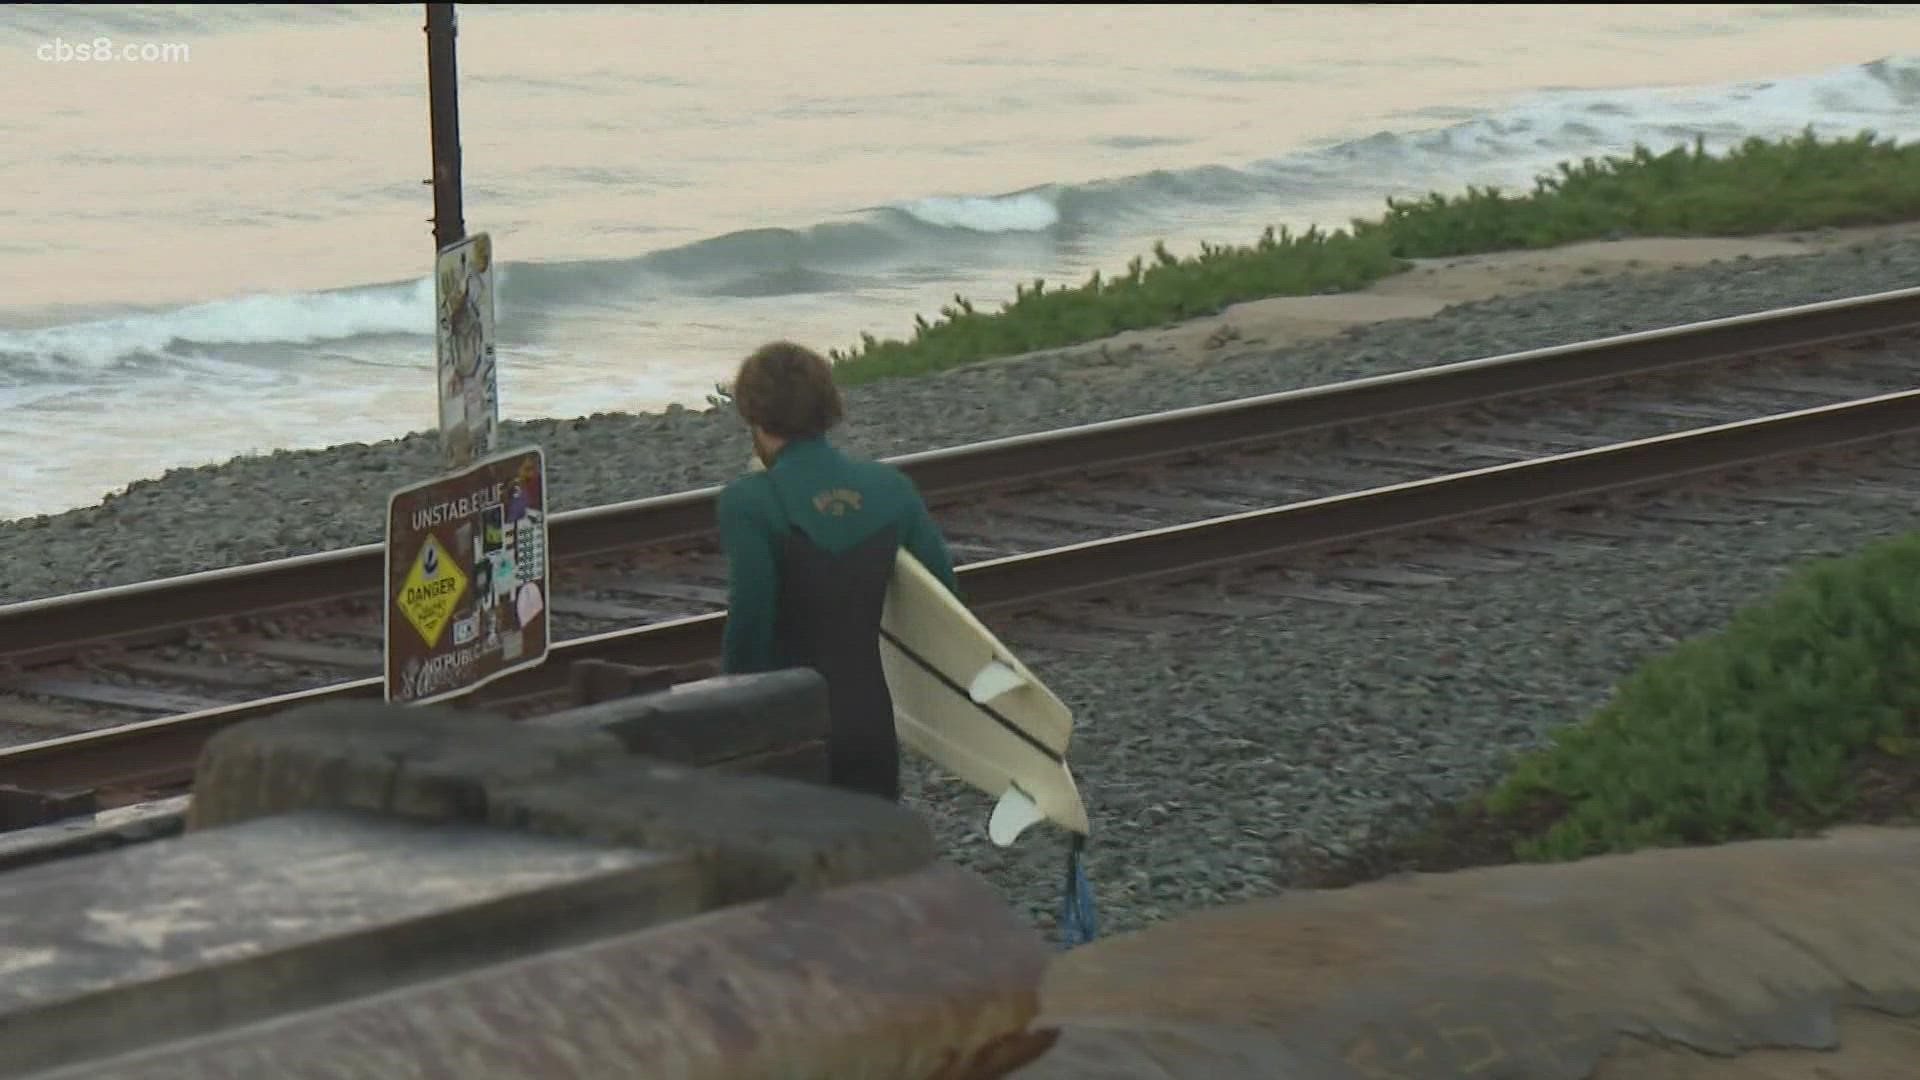 NCTD plans to put a stop to people crossing the tracks by installing six-foot fences on both sides of the tracks in Del Mar.